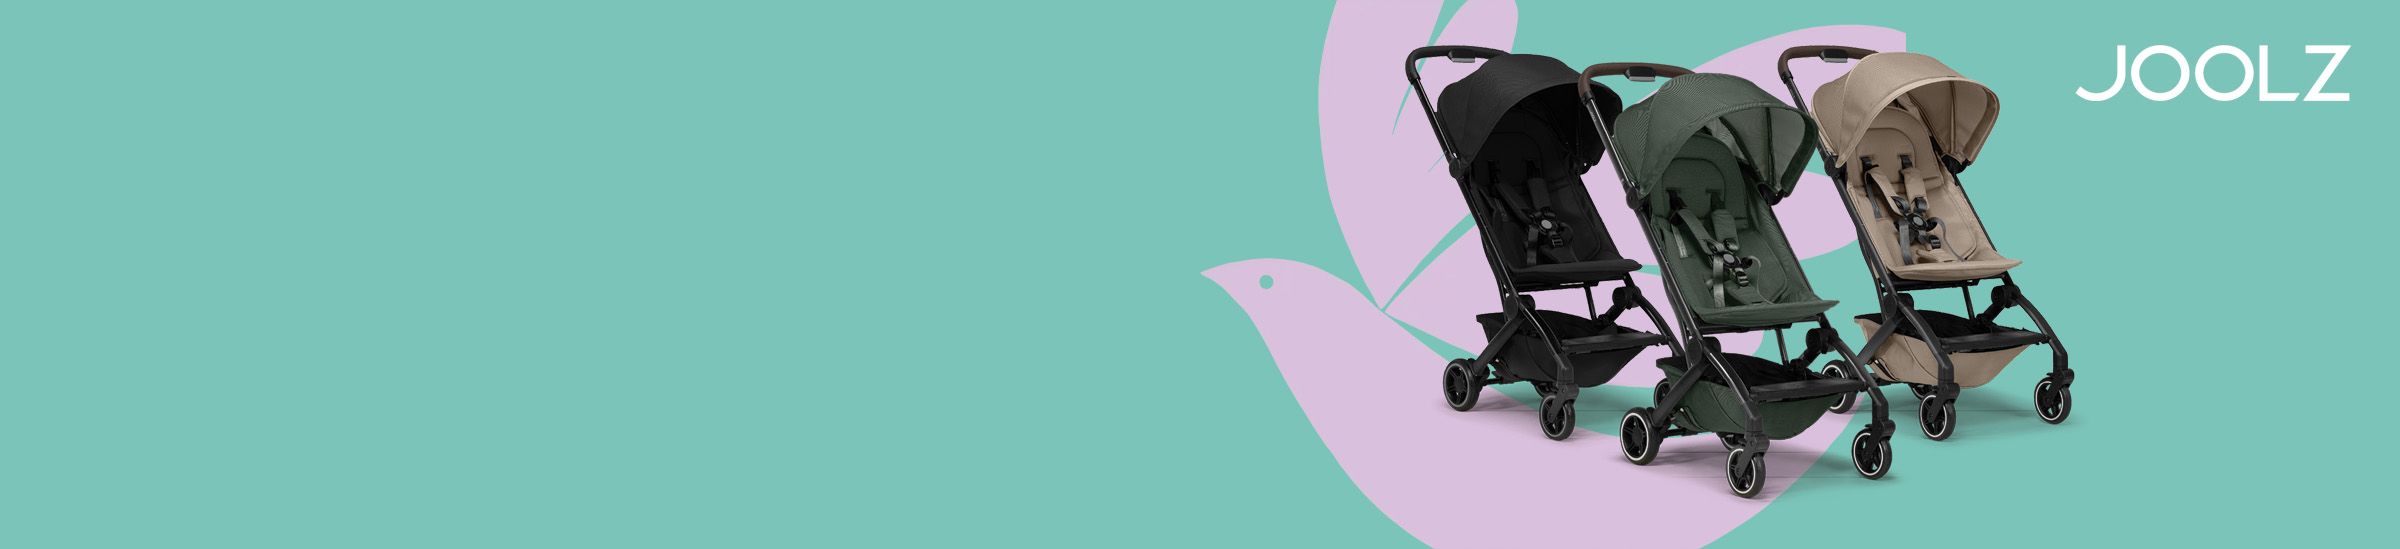 Joolz Strollers on a teal background